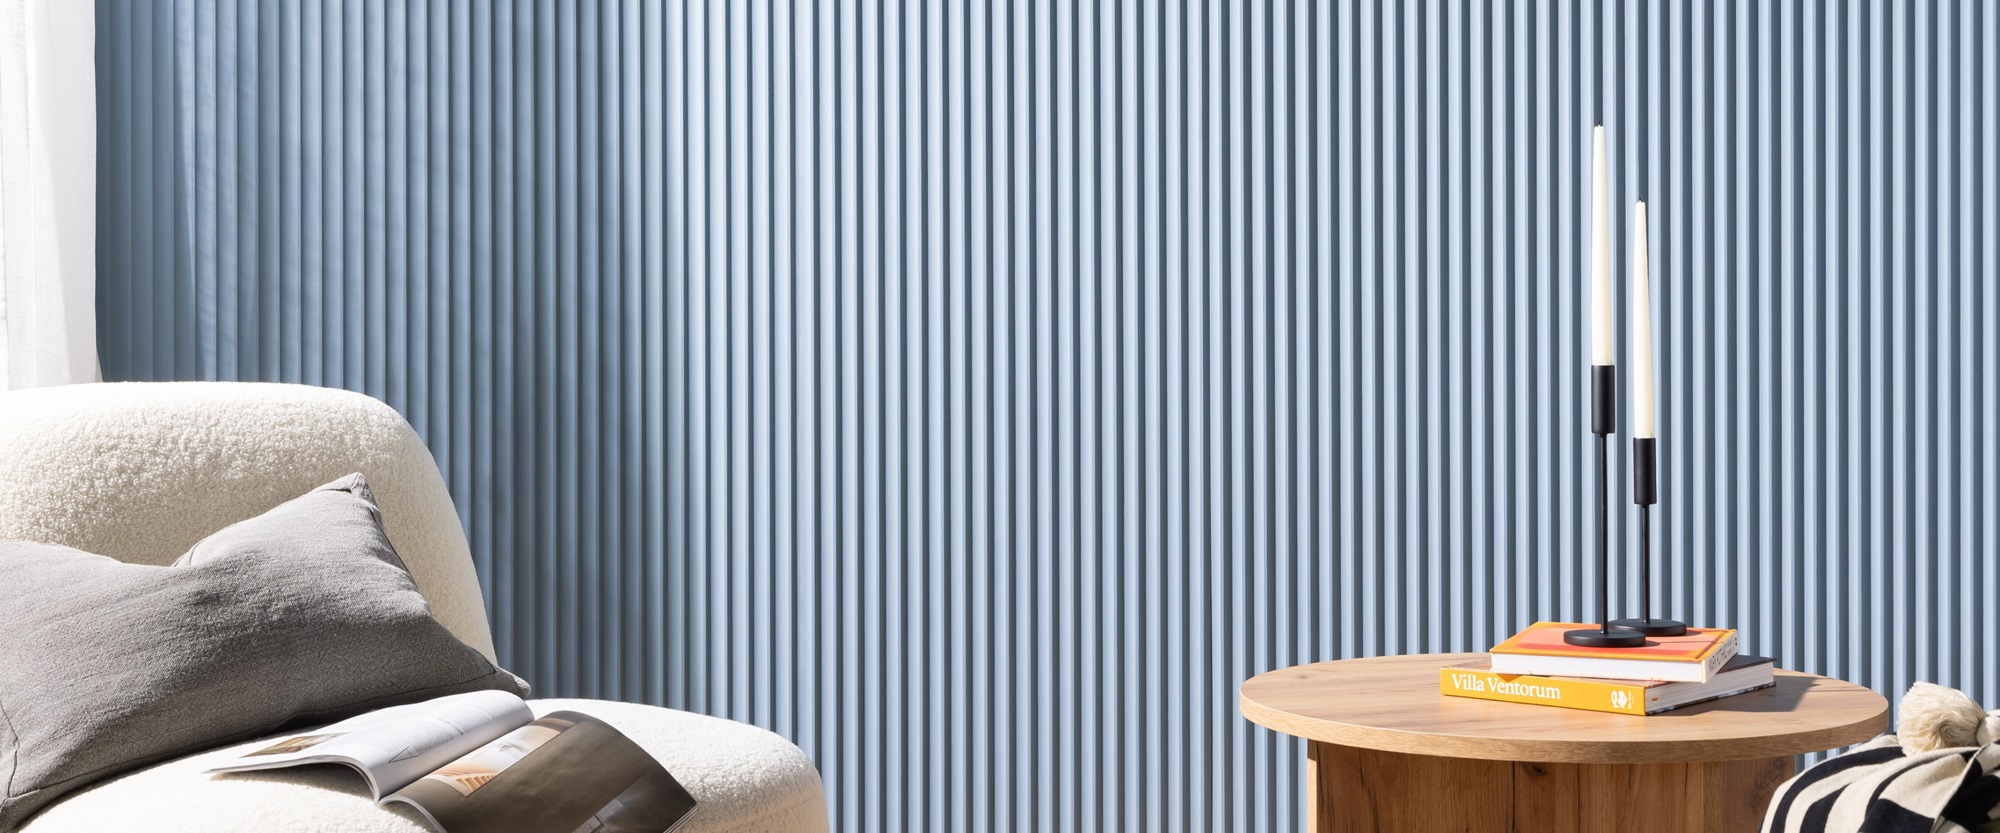 Customize Your Space: Naturewall’s New Paintable Wall Panels